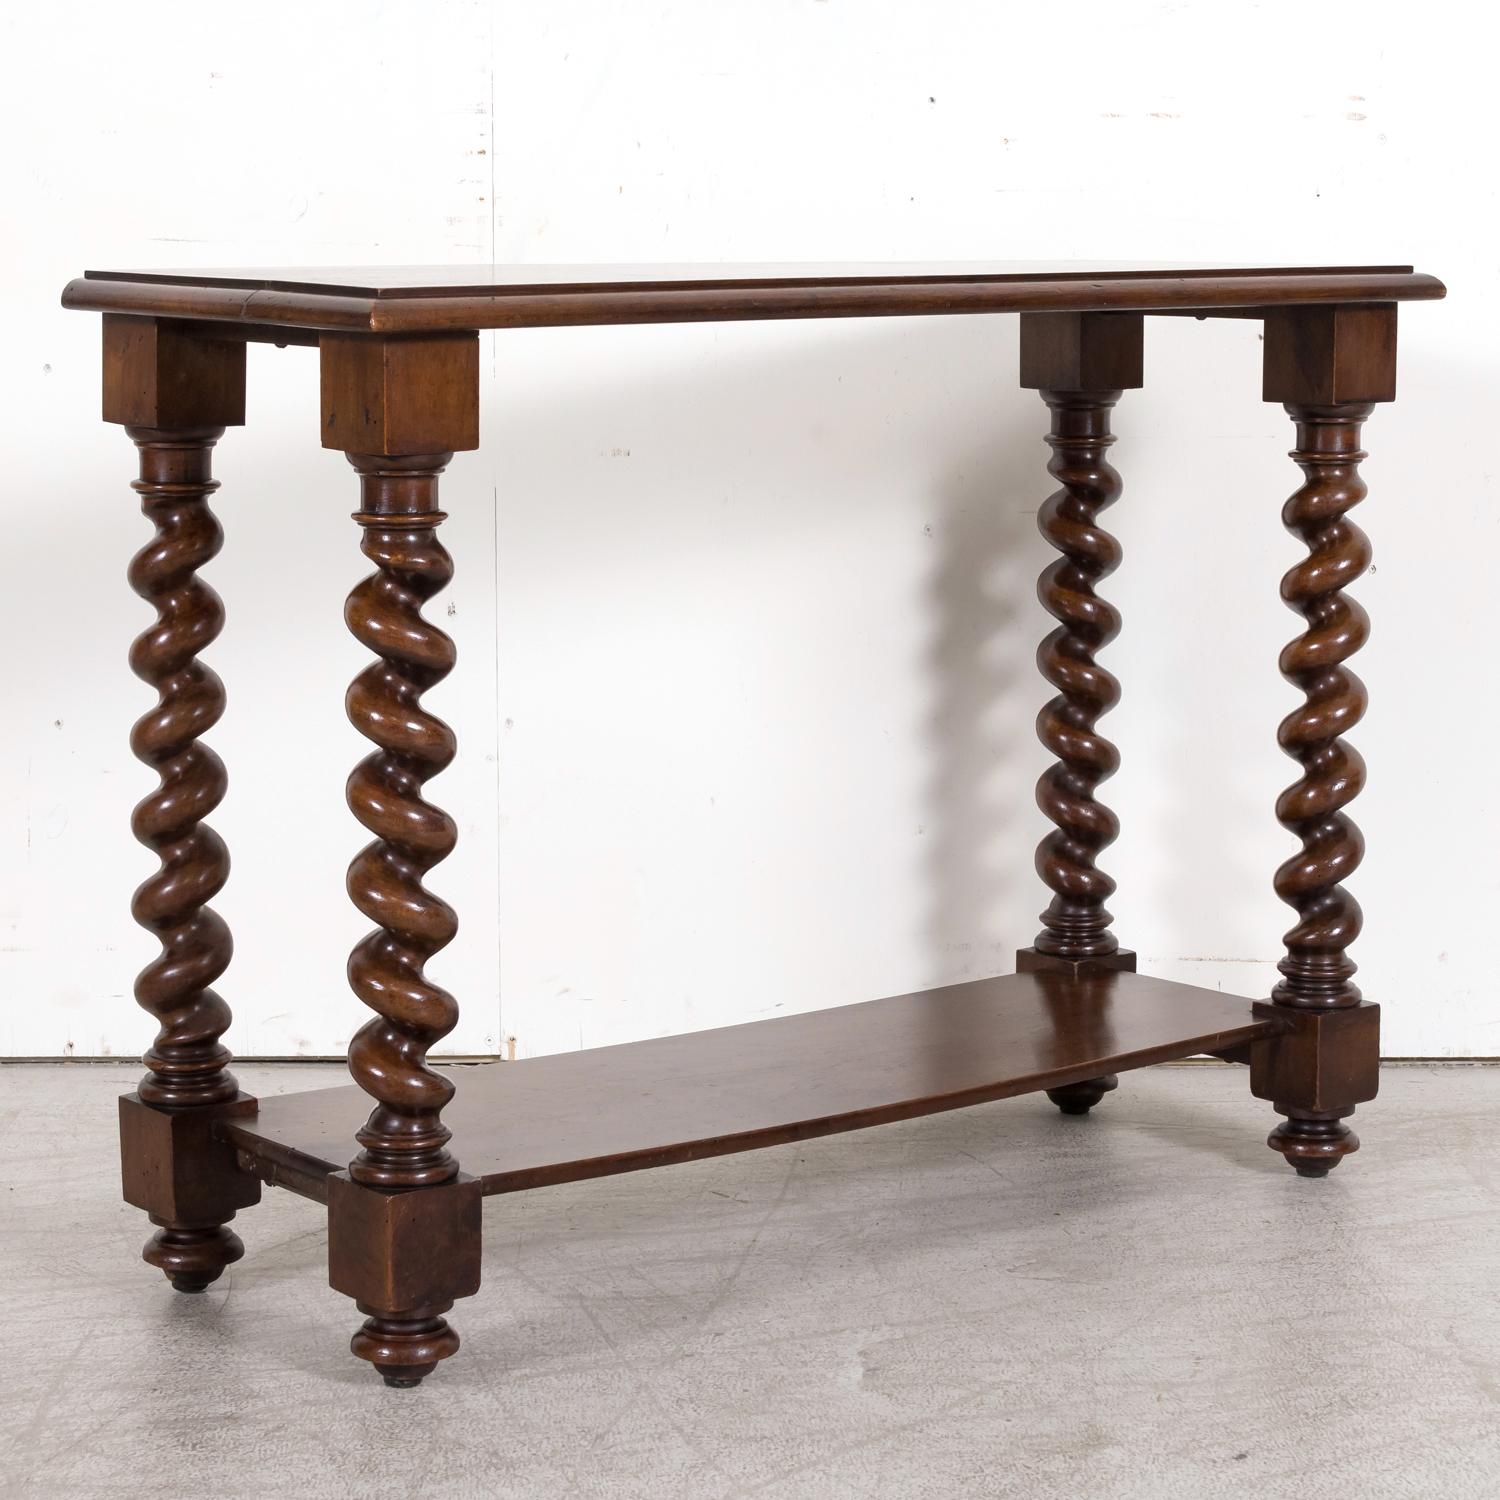 A fantastic 19th century French Louis XIII style petite barley twist console table hand crafted of solid walnut in Bordeaux, circa 1890s. Having a rectangular beveled plank top resting on four beautifully hand carved and turned barley twist legs